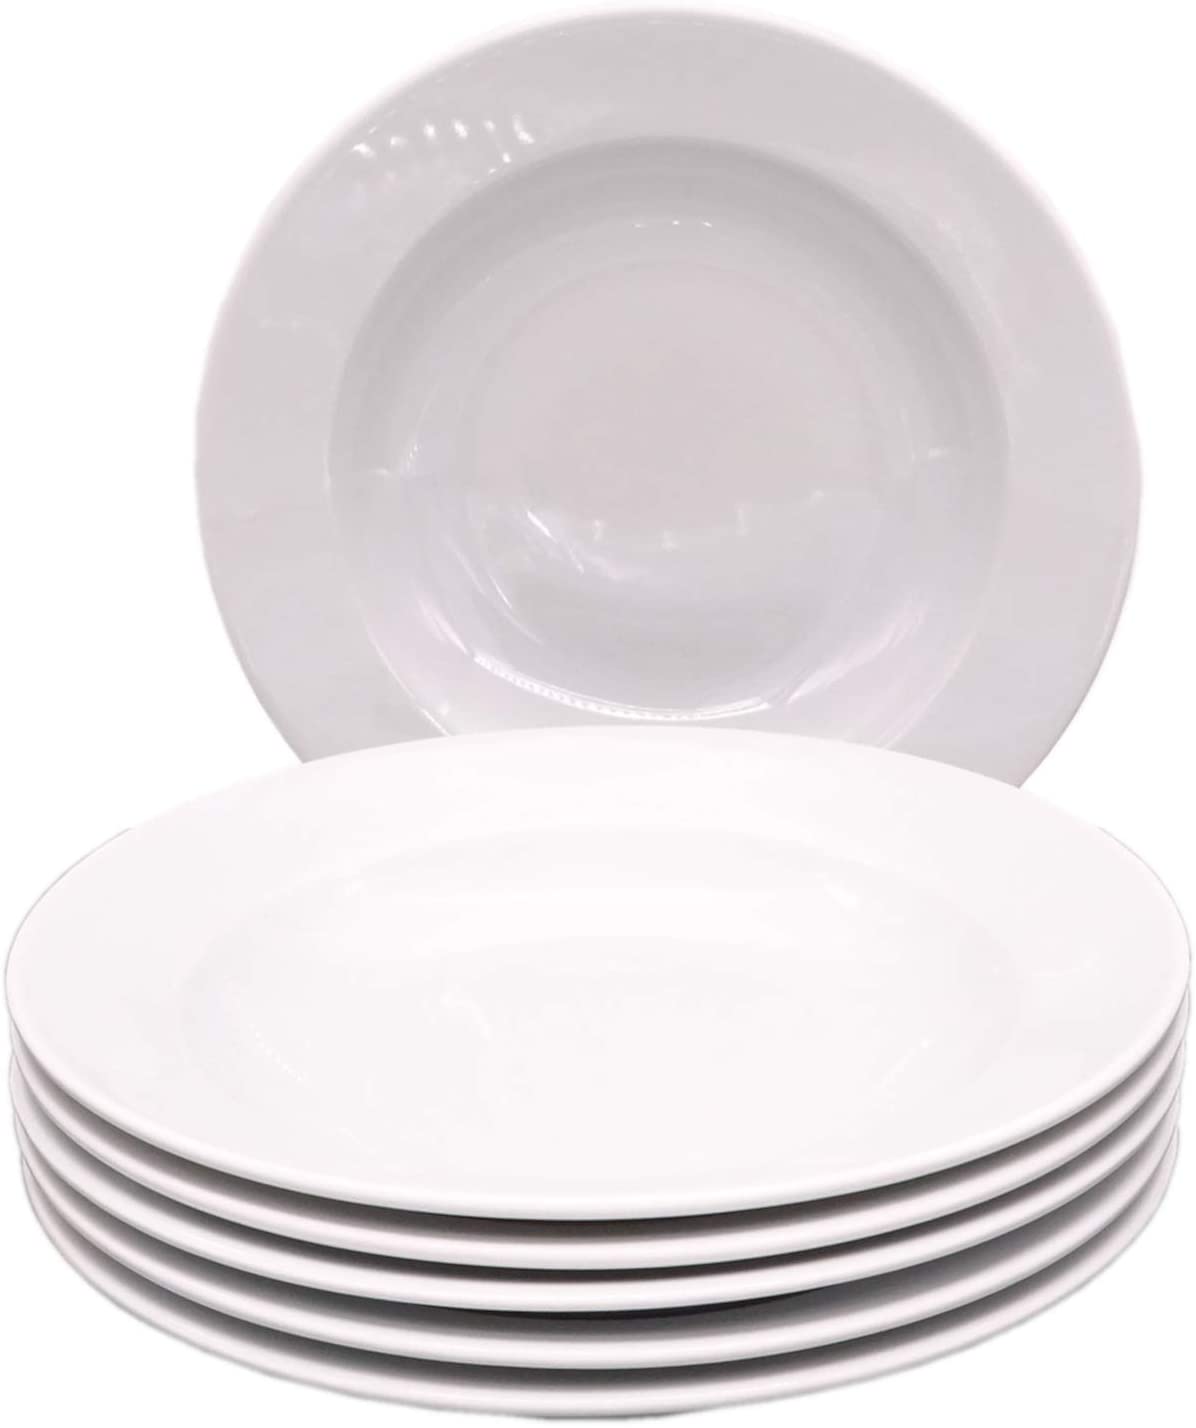 Kahla Pronto 57G112A90057C Porcelain Plate Set 6 Pieces Soup Plate for 6 People Round White Pasta Plate without Decoration